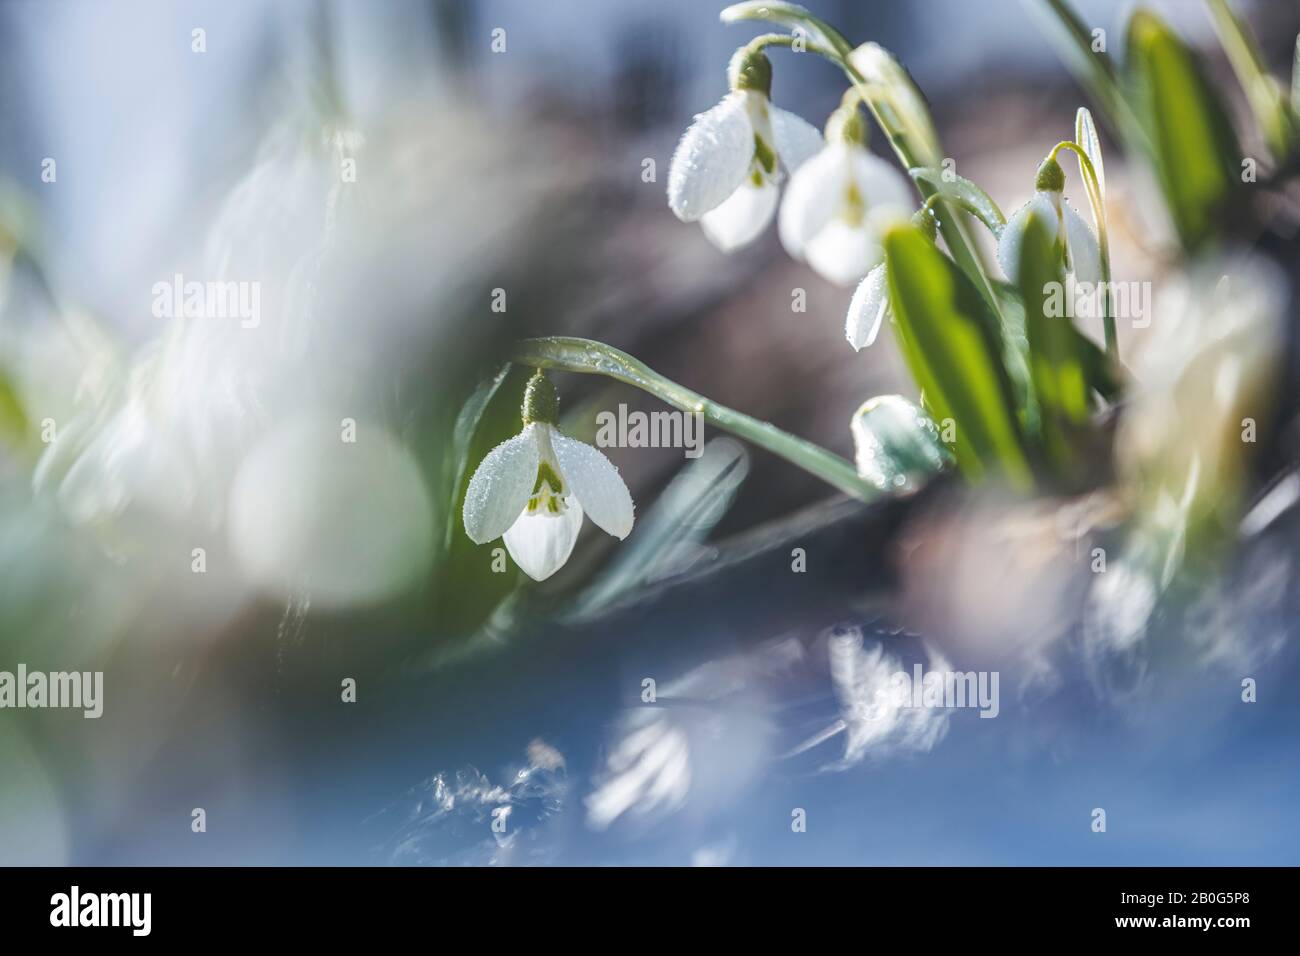 Tender spring flowers snowdrops harbingers of warming symbolize the arrival of spring. White blooming snowdrop folded or Galanthus plicatus. Spring su Stock Photo